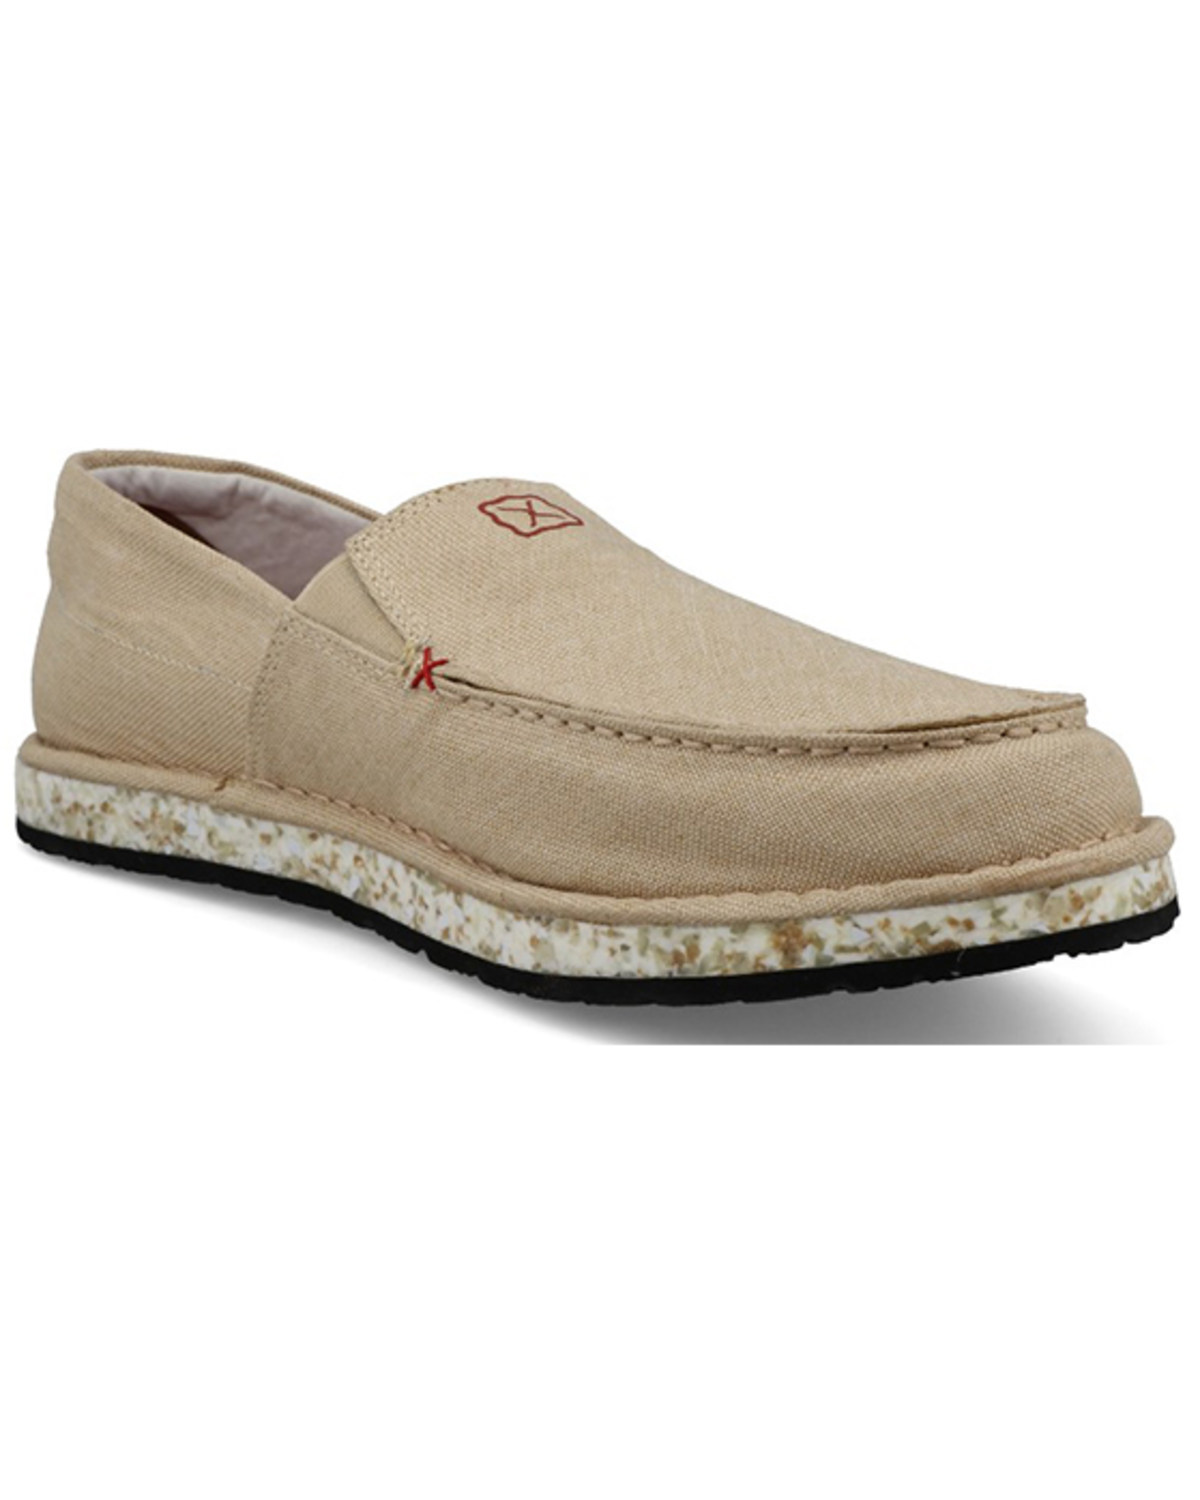 Twisted X Men's Circular Project Slip-On casual Shoes - Moc Toe